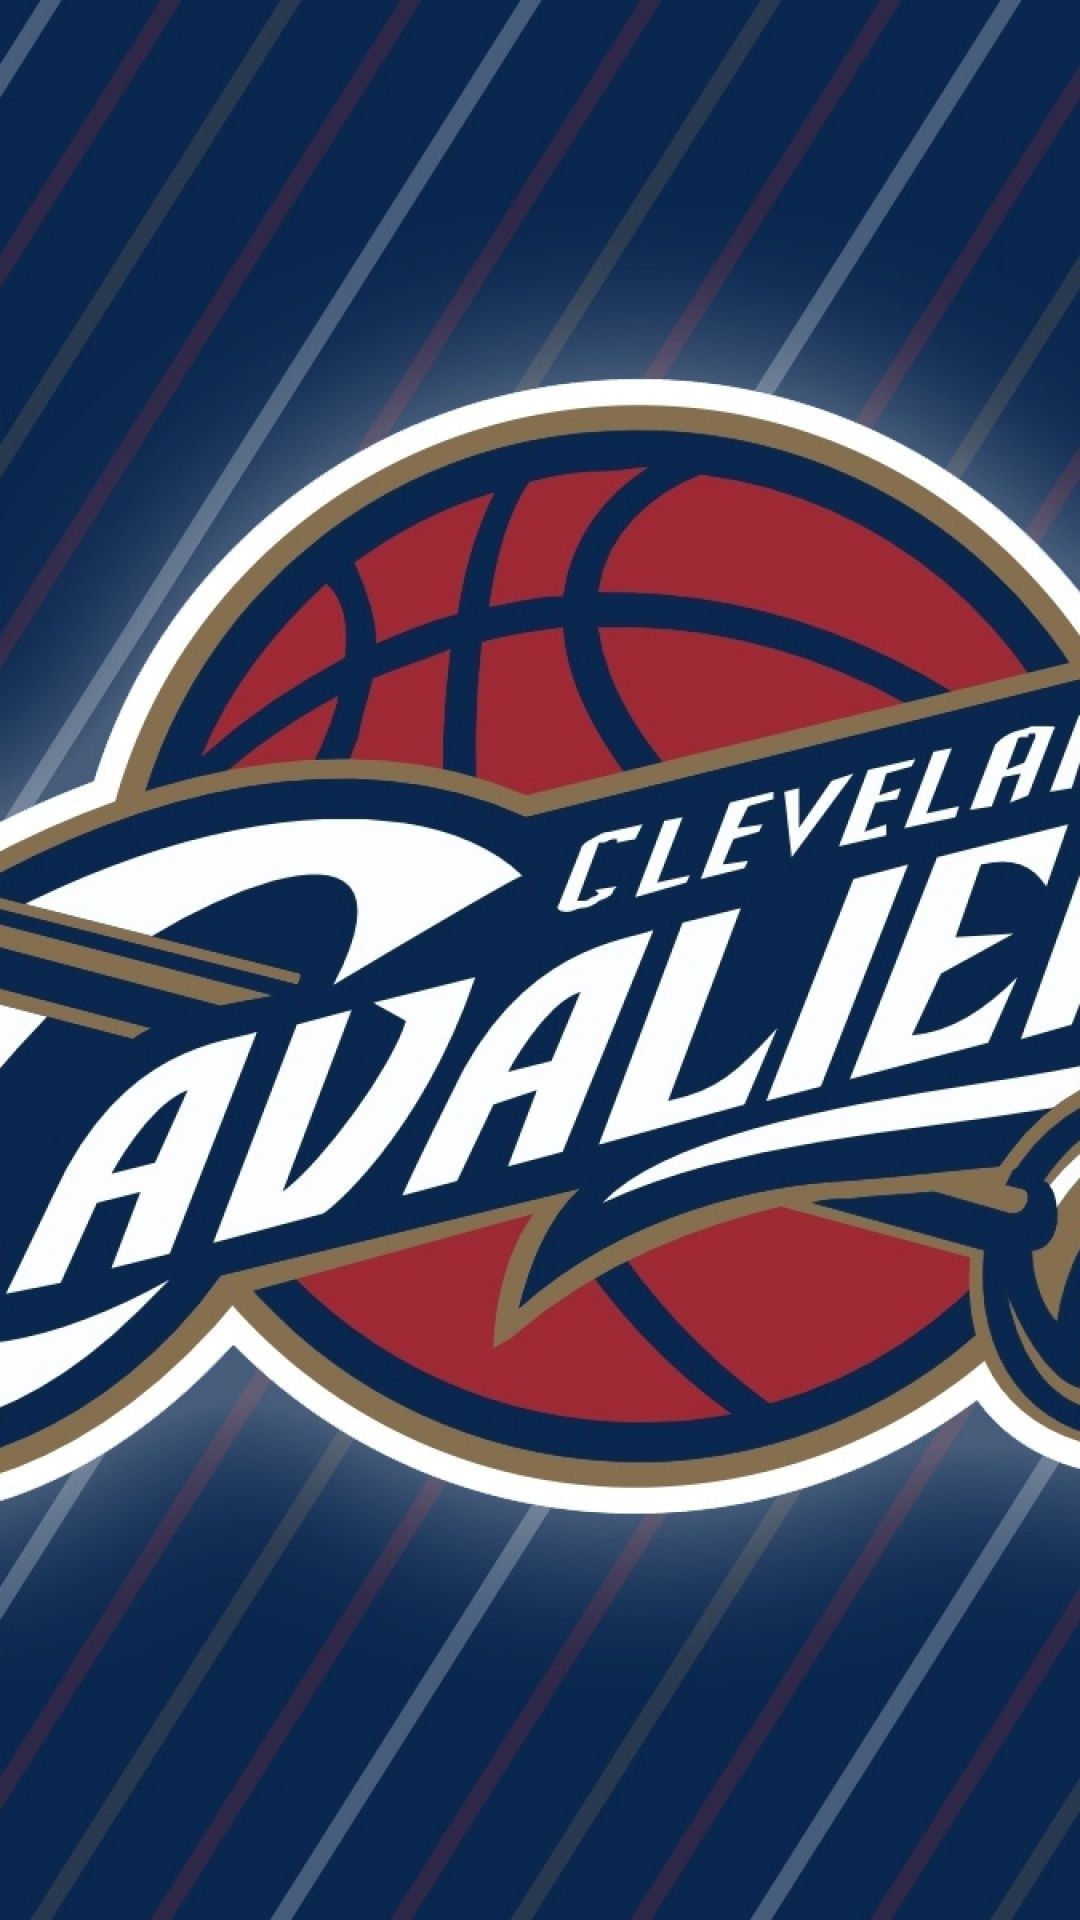 Cleveland Cavaliers S4 Wallpaper ID 25846